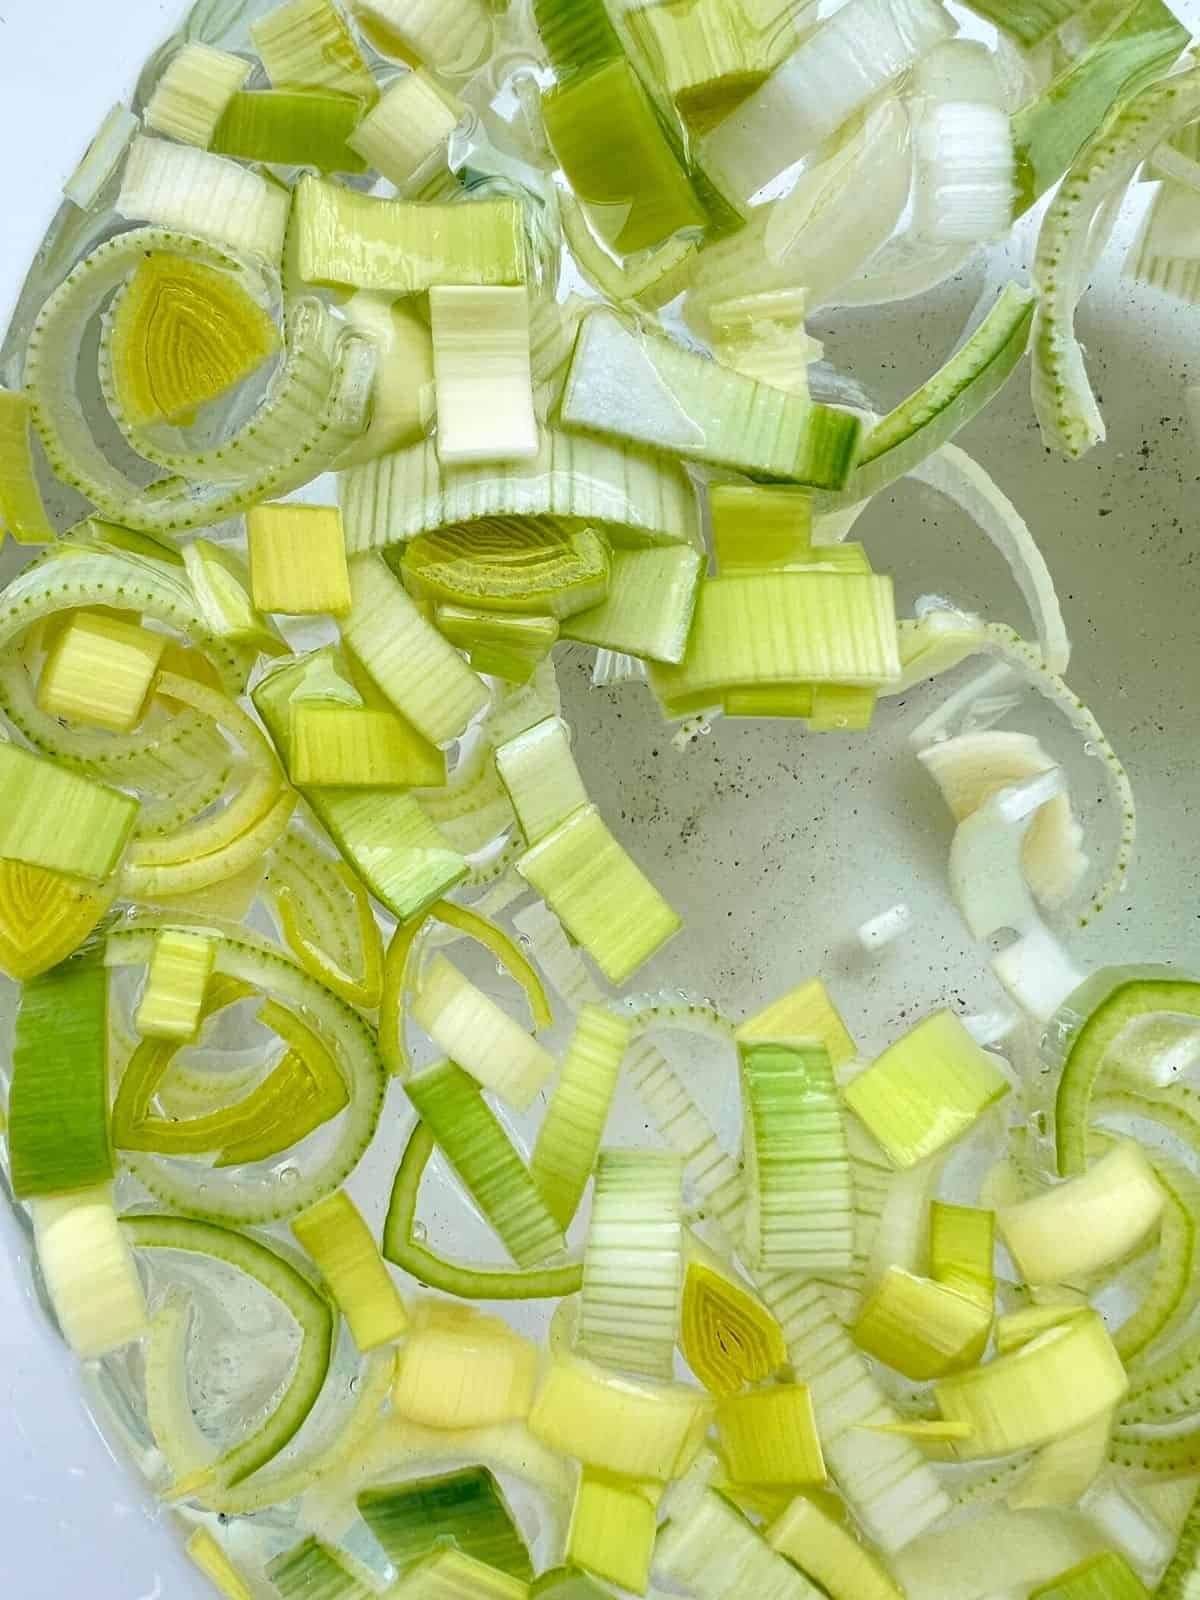 A close up of cut leeks soaking in water in a glass bowl.